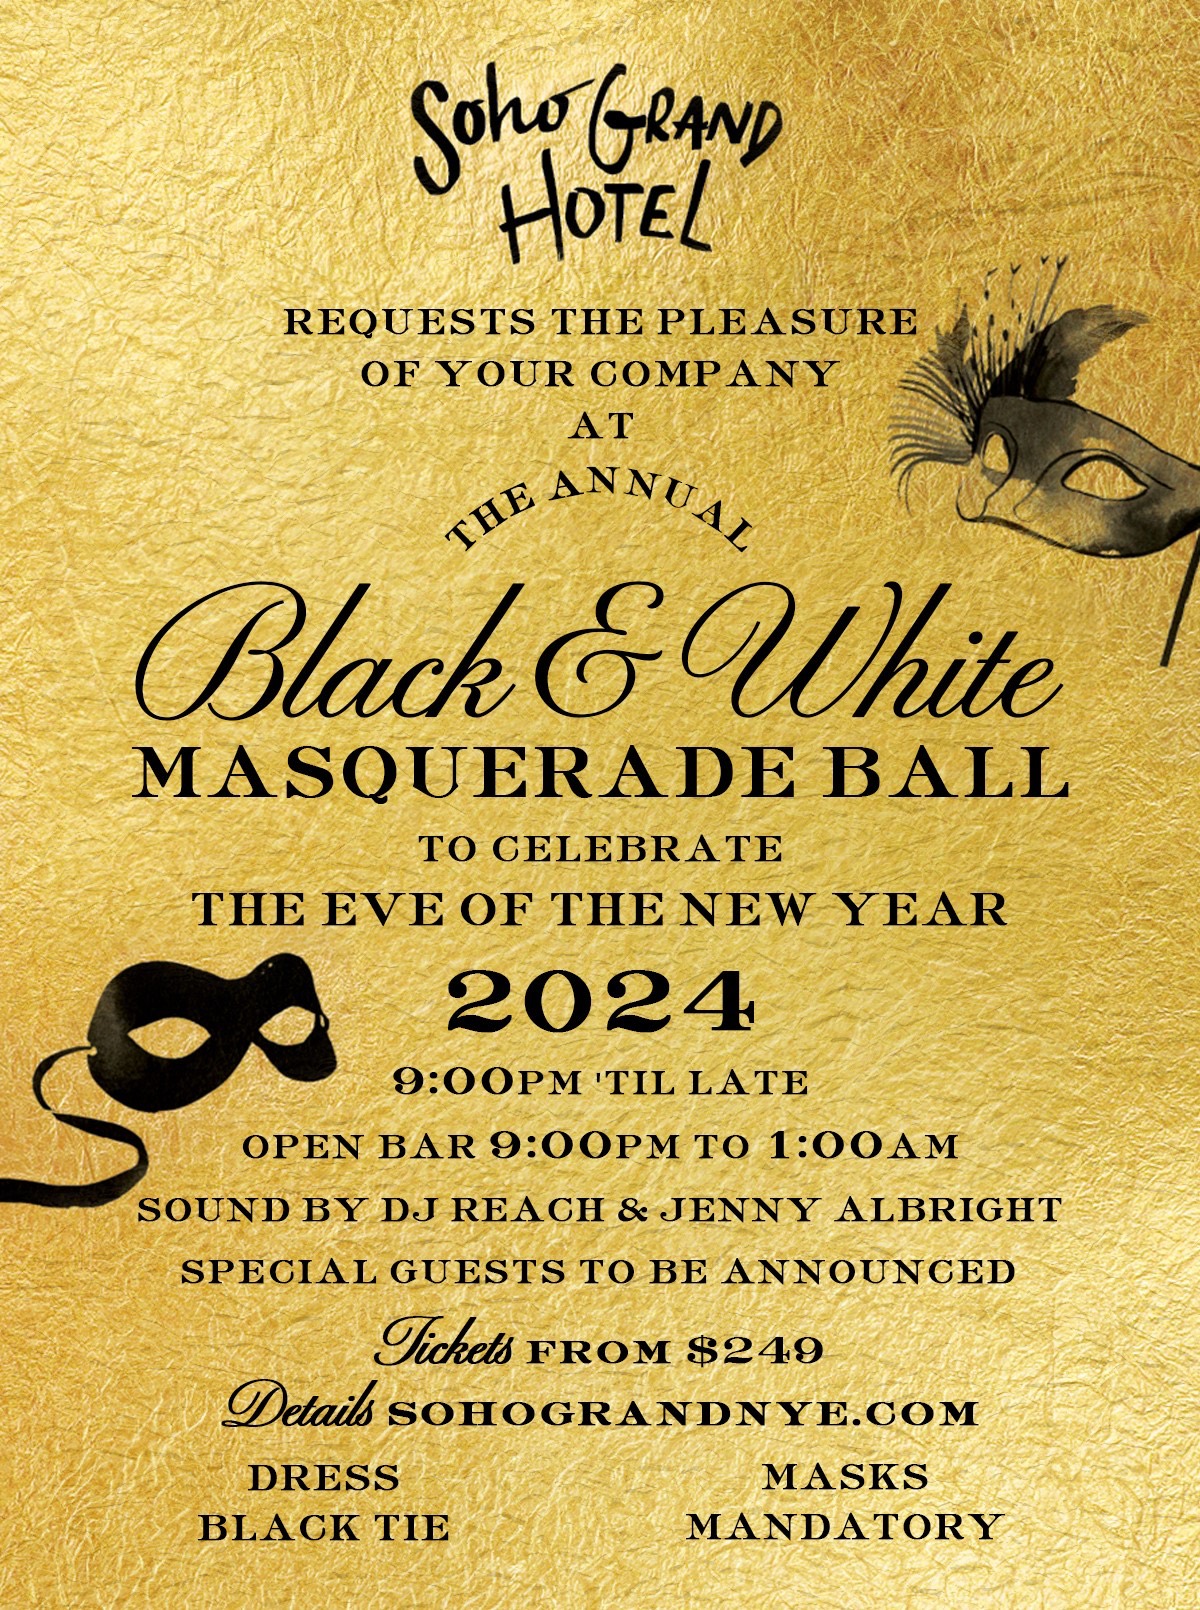 Soho Grand Hotel's Invitation for New Year's Eve 2024. Gold background with black lettering.